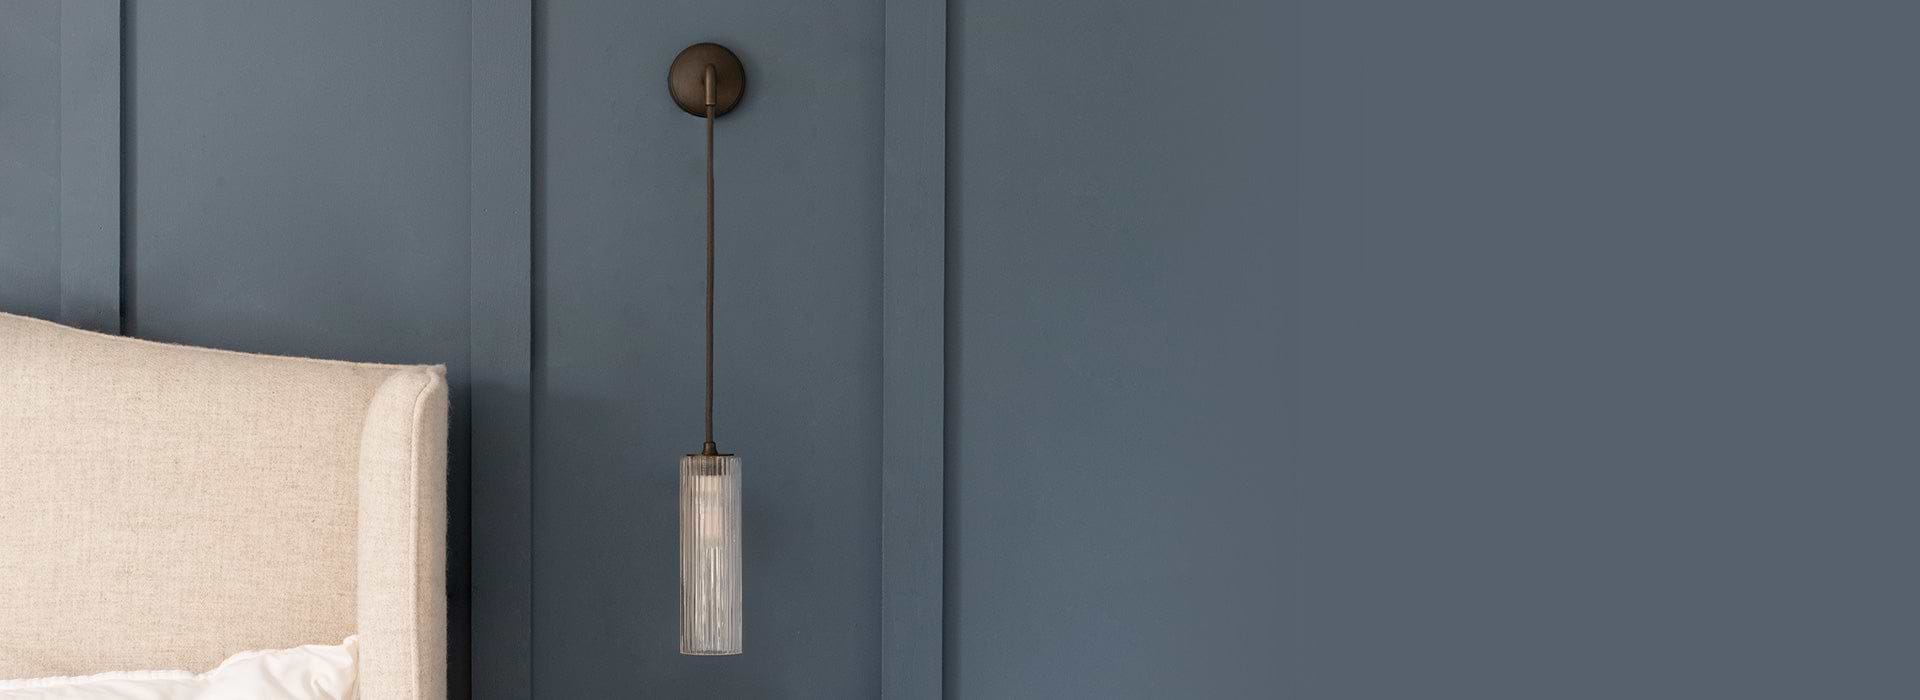 Bronze pendant wall light with fluted glass by Corston bedside